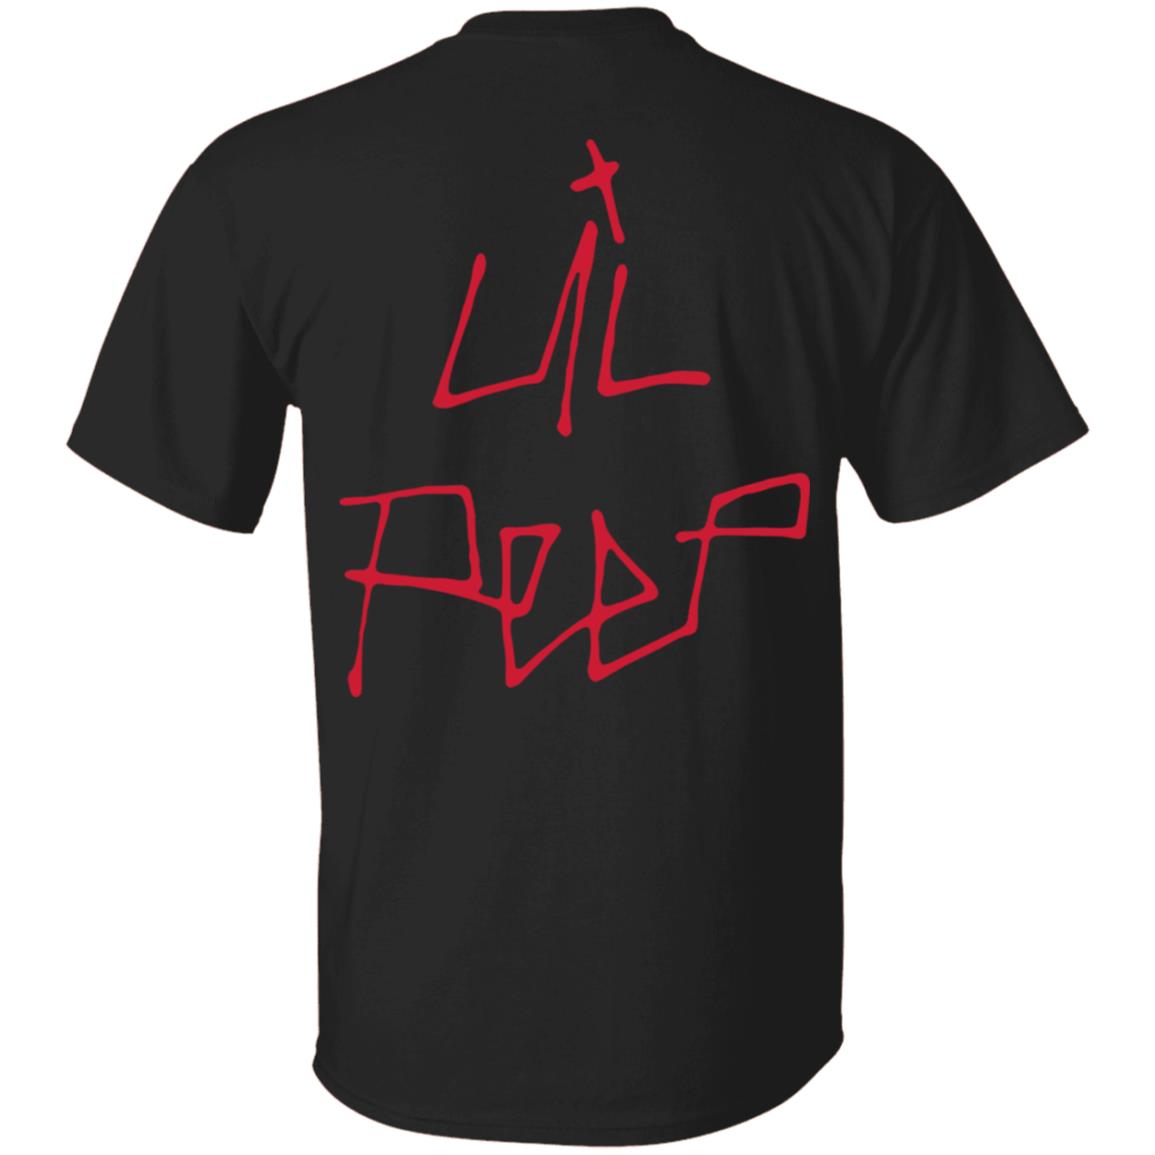 Lil Peep Come Over When You're Sober PT 2 T-Shirt - Tipatee